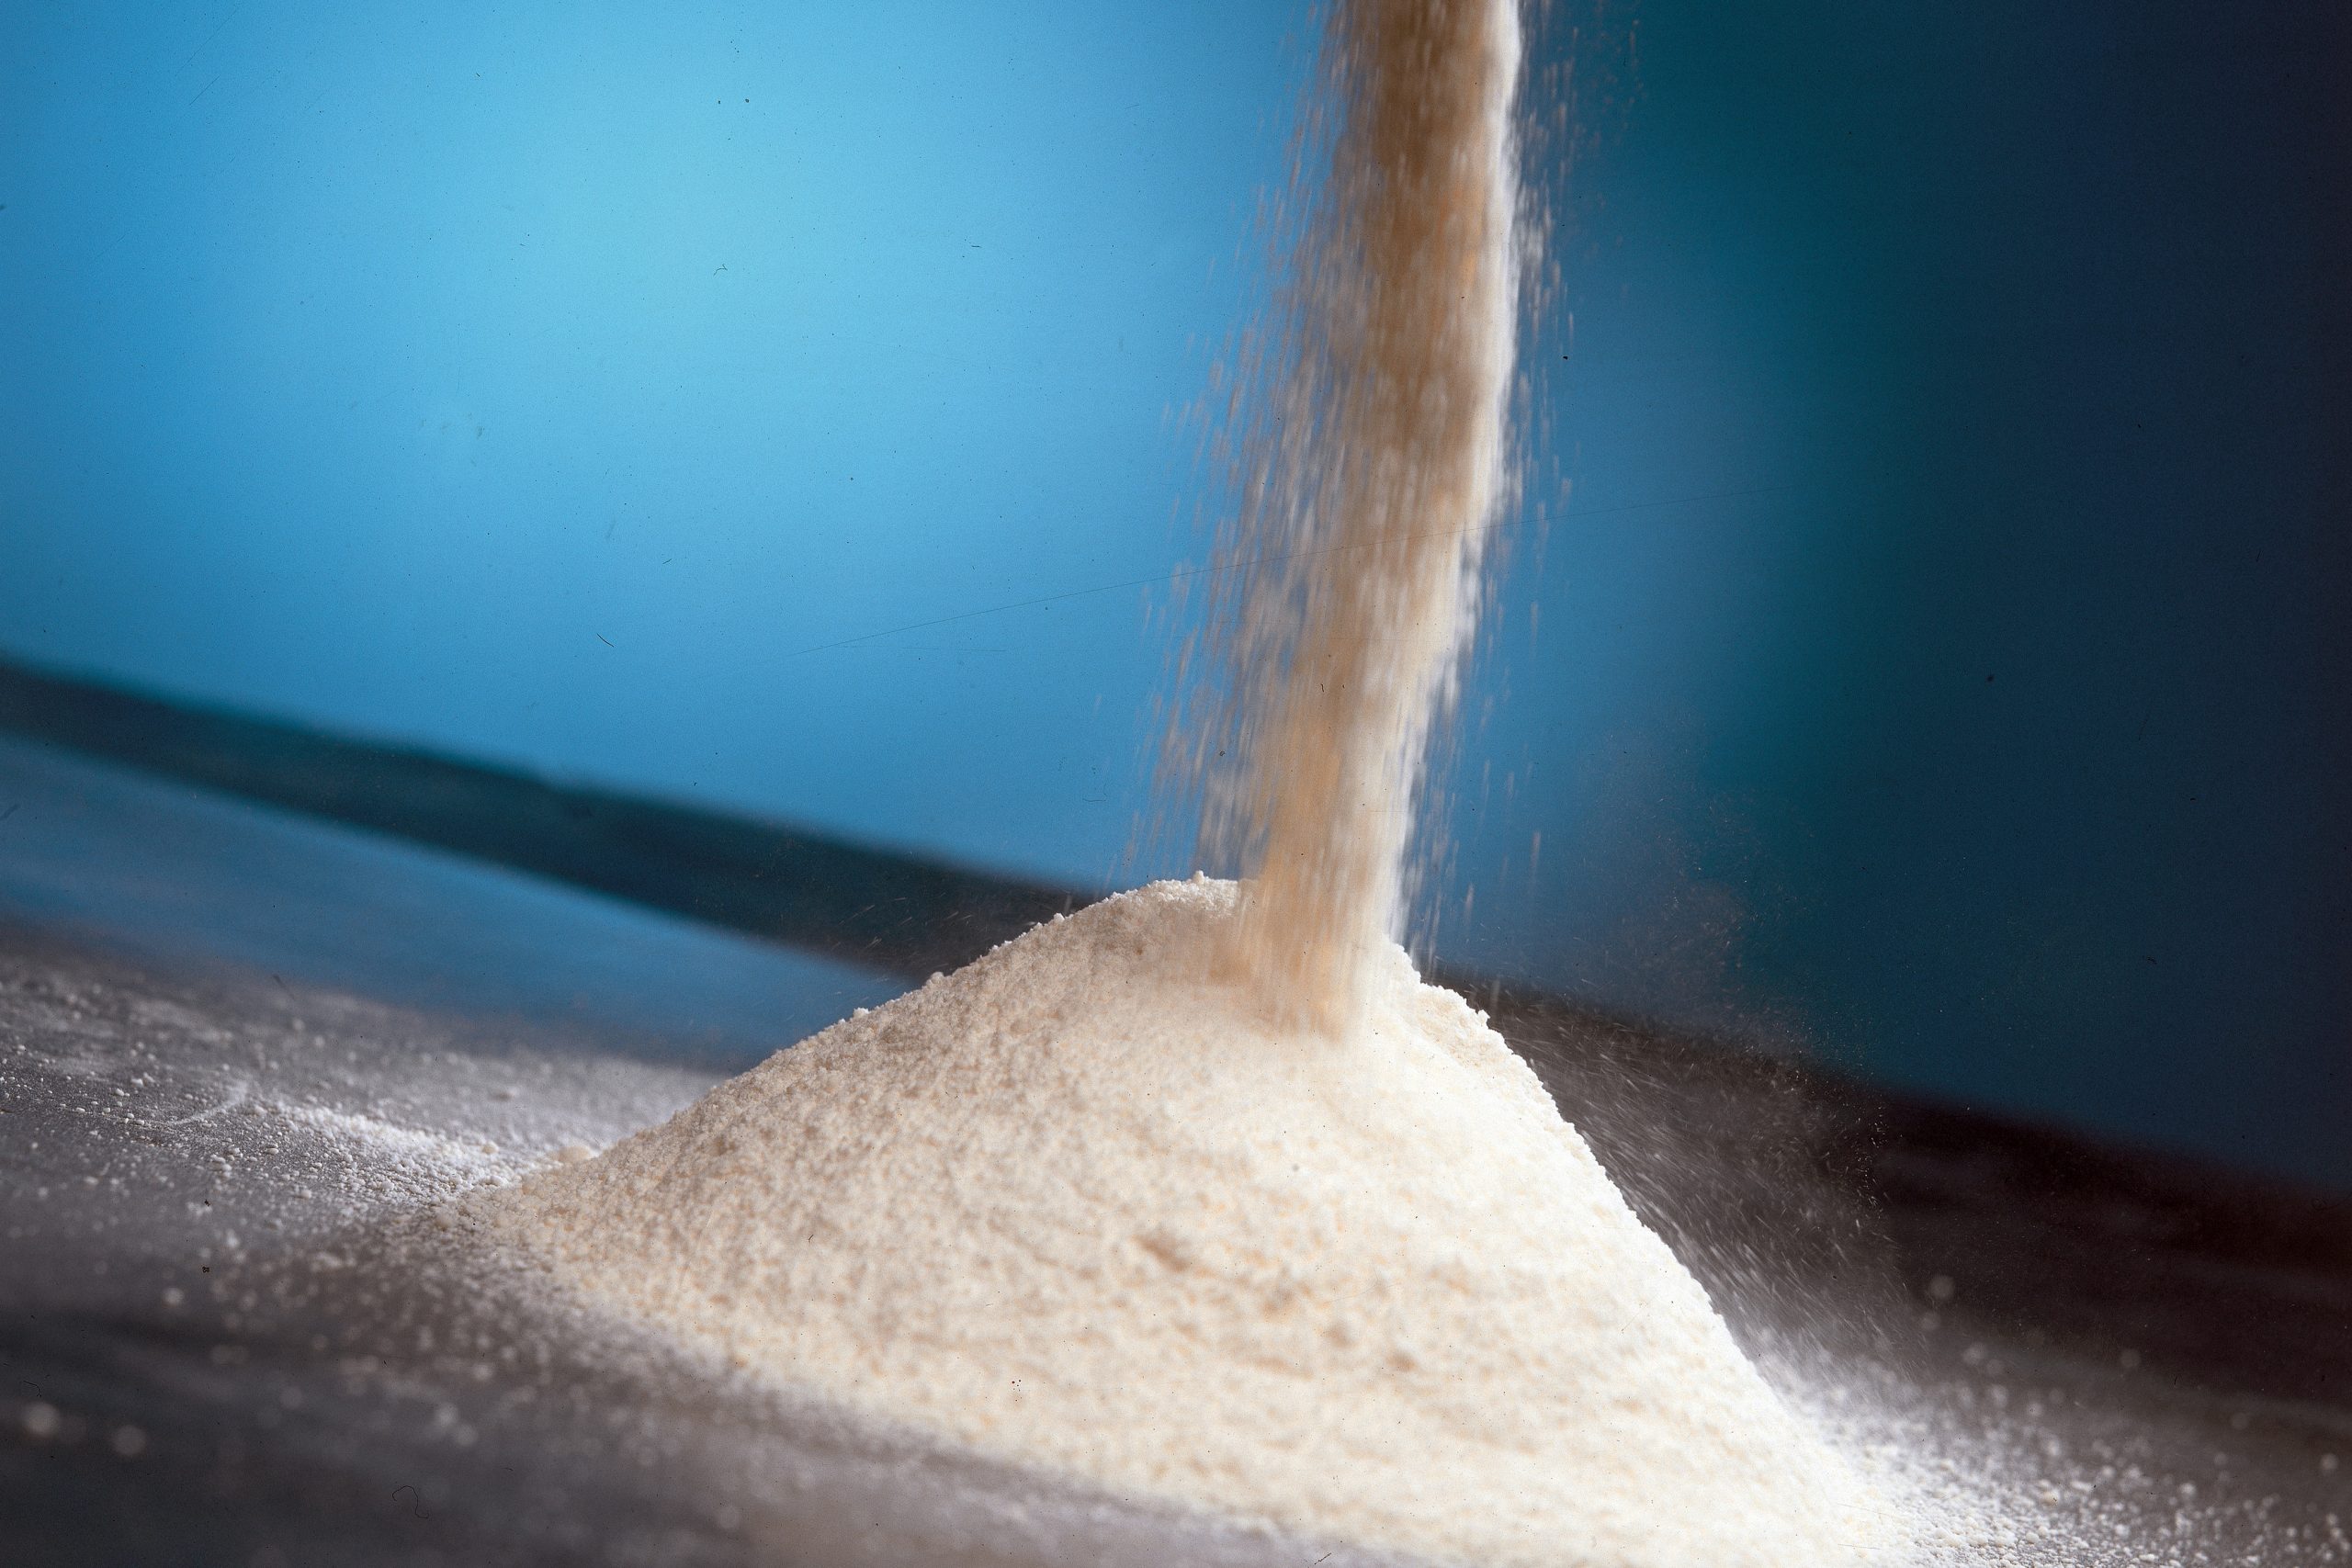 Feed additives can be added during processing as dry or liquid form. Liquid addition always causes micro-agglomeration or clustering by binding small sized particles to larger particles. Photo: RBI